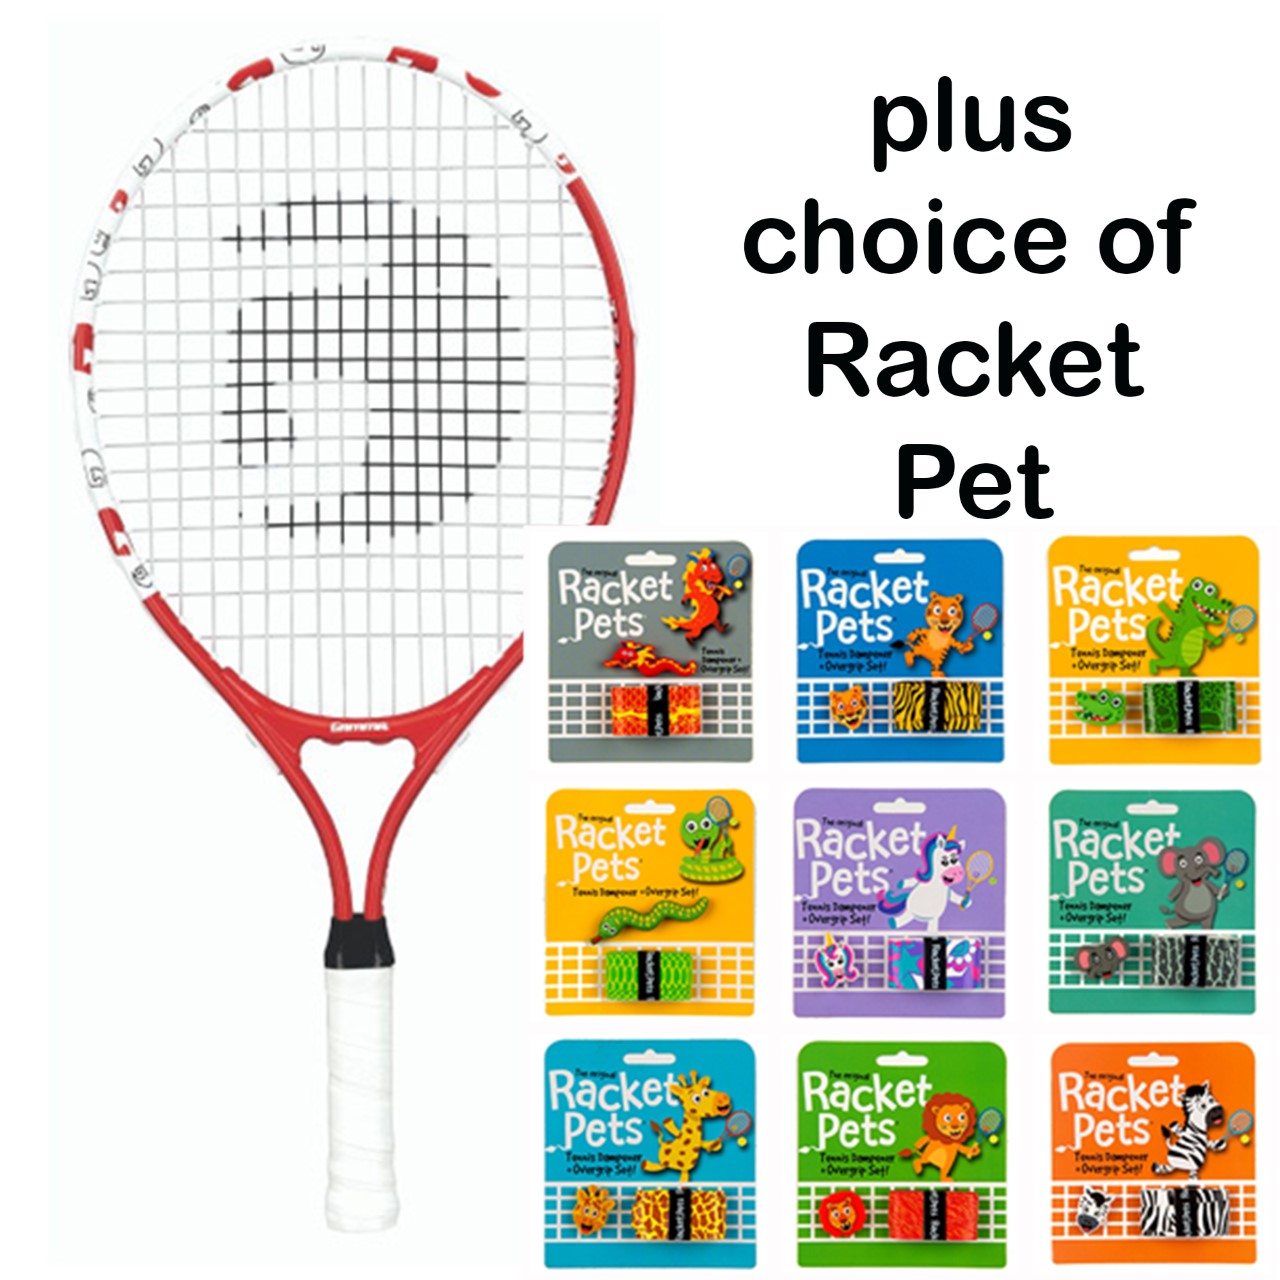 19inch Custom Tennis Racket Tennis Racquet for Kids with Cover